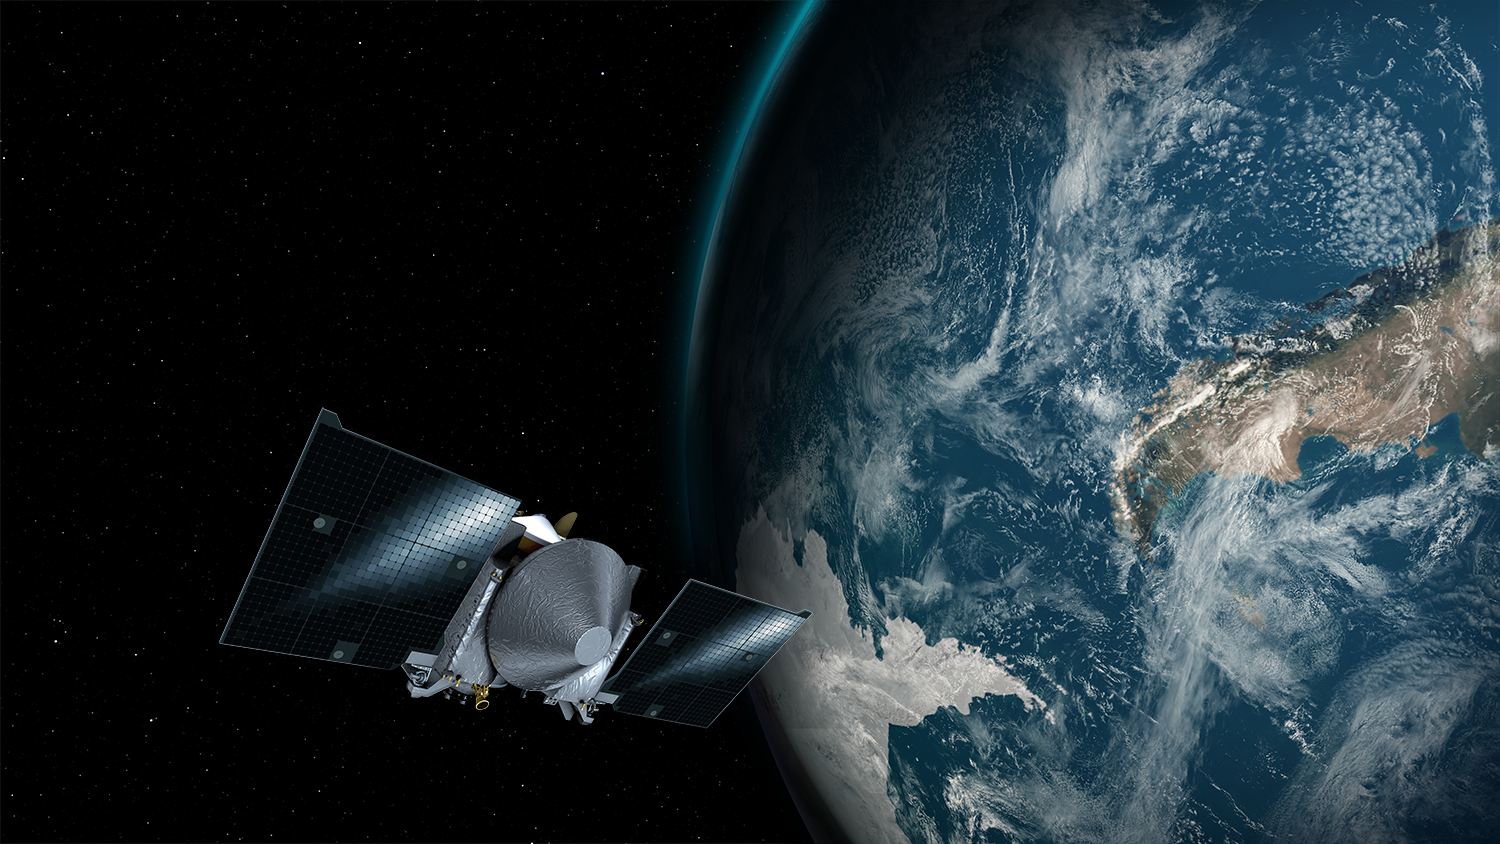 NASA’s asteroid-collecting spacecraft will slingshot around Earth today